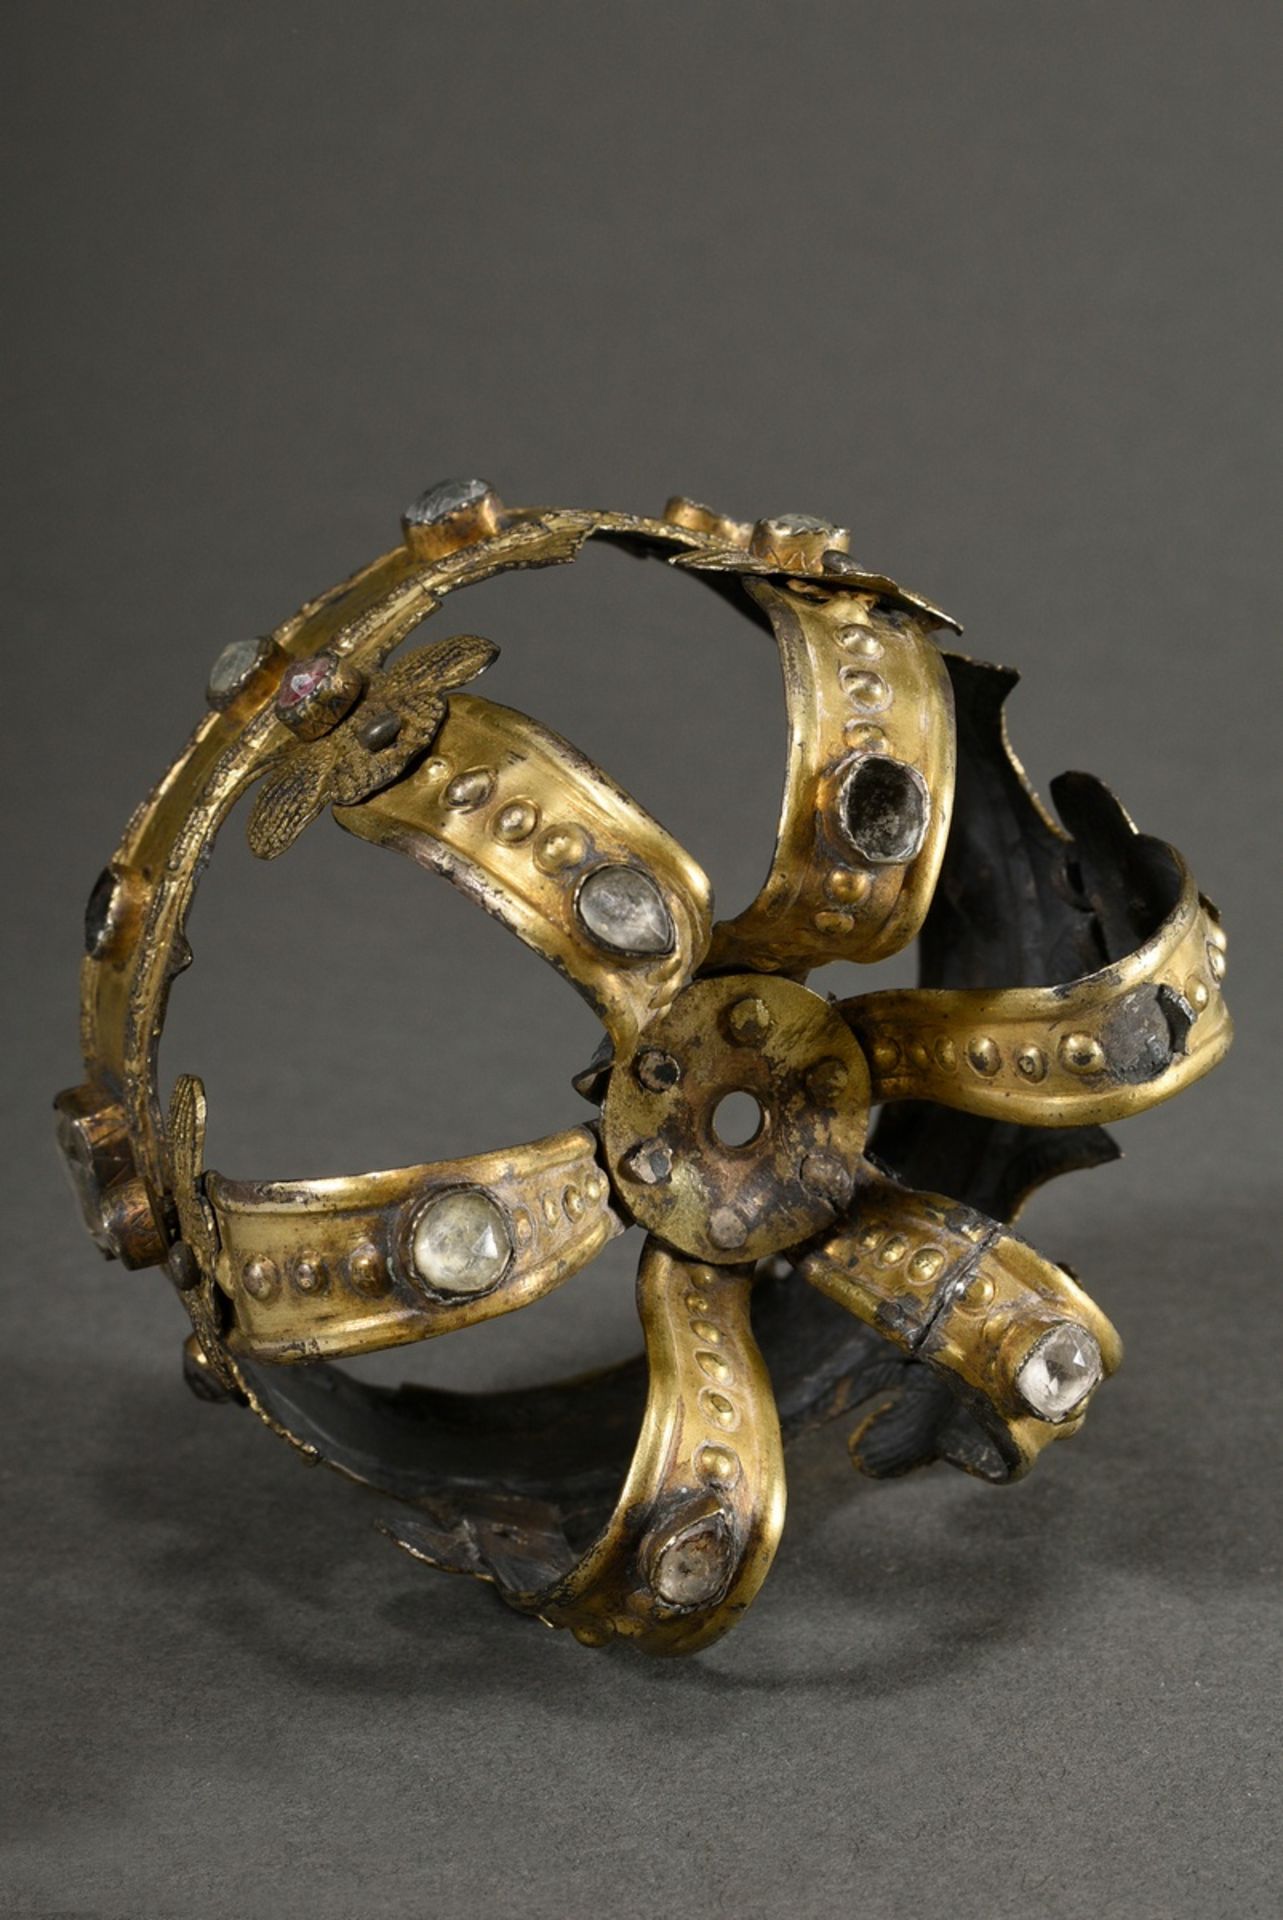 Antique crown of the Virgin Mary with glass stones, probably South German, 19th century, gilt metal - Image 5 of 9